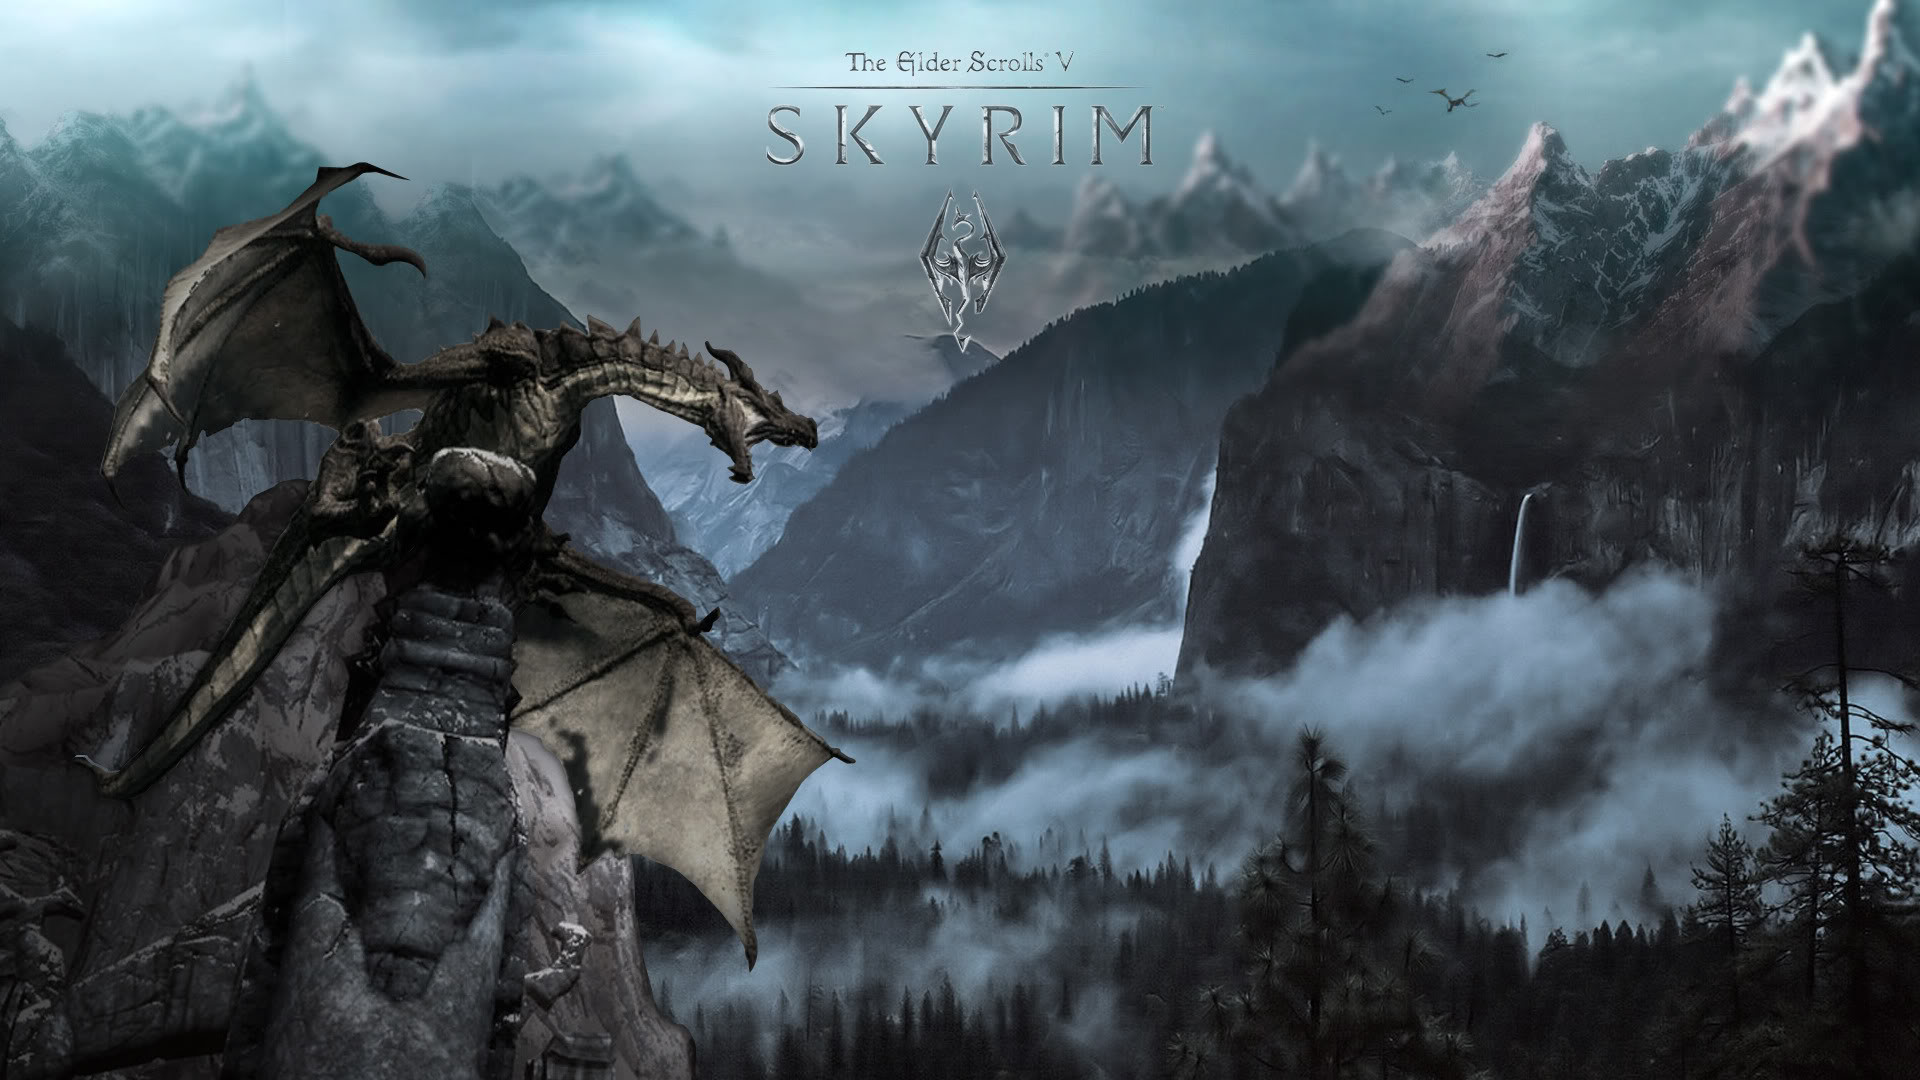 1920x1080 dragon skyrim wallpaper hd windows mac wallpapers amazing high definition  best wallpaper ever wallpaper for iphone download pictures 1920Ã1080  Wallpaper HD